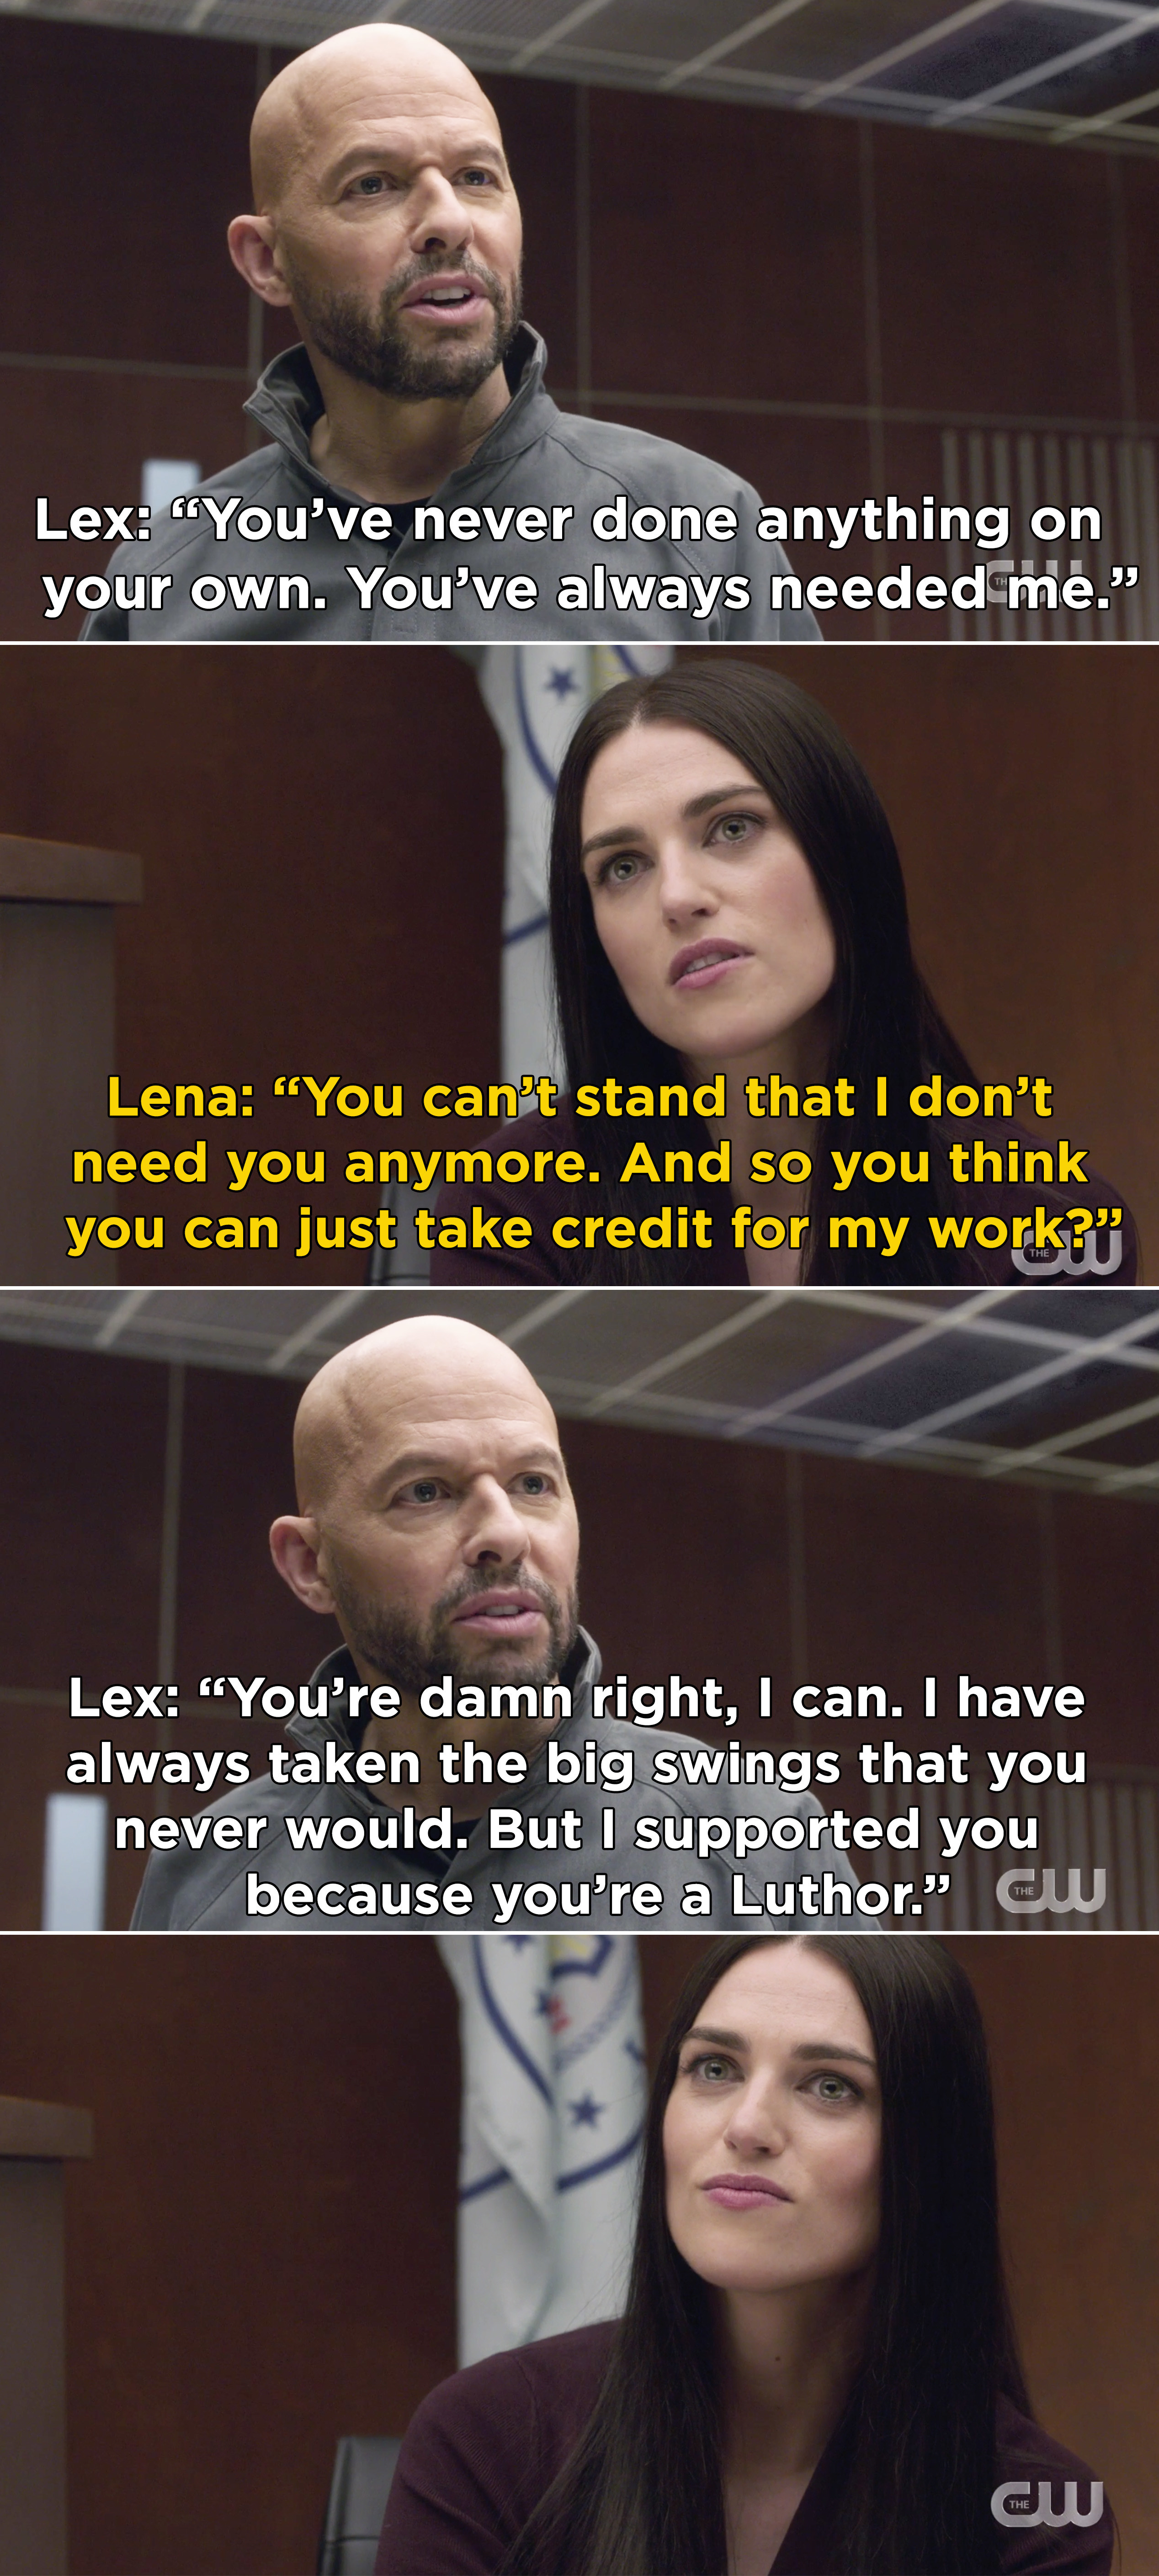 Lex and Lena arguing in court and Lex saying she always needed him